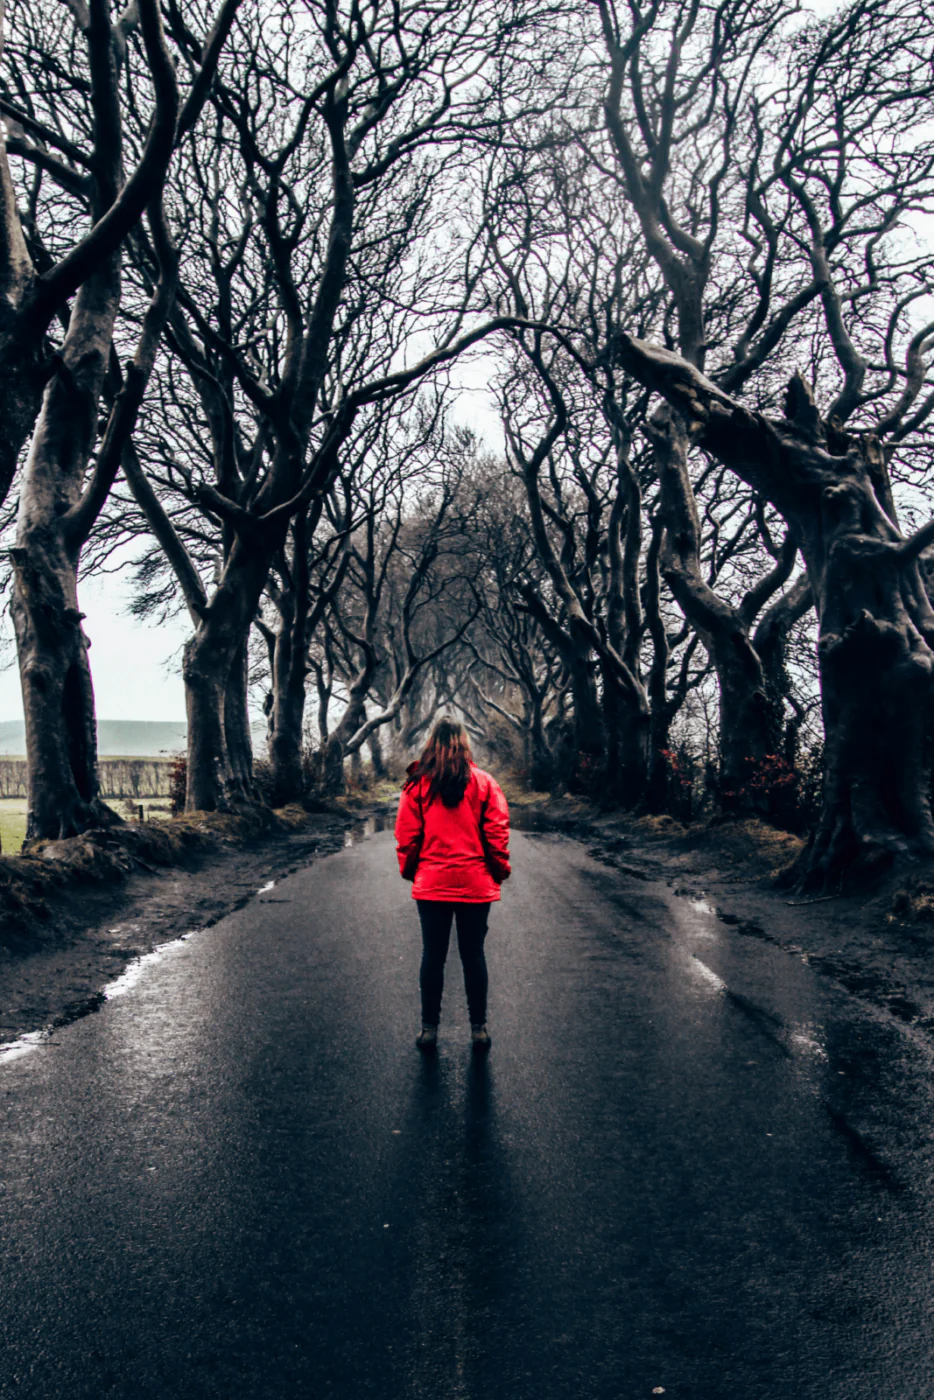 Woman in red coat standing on rainy street at the dark hedges.